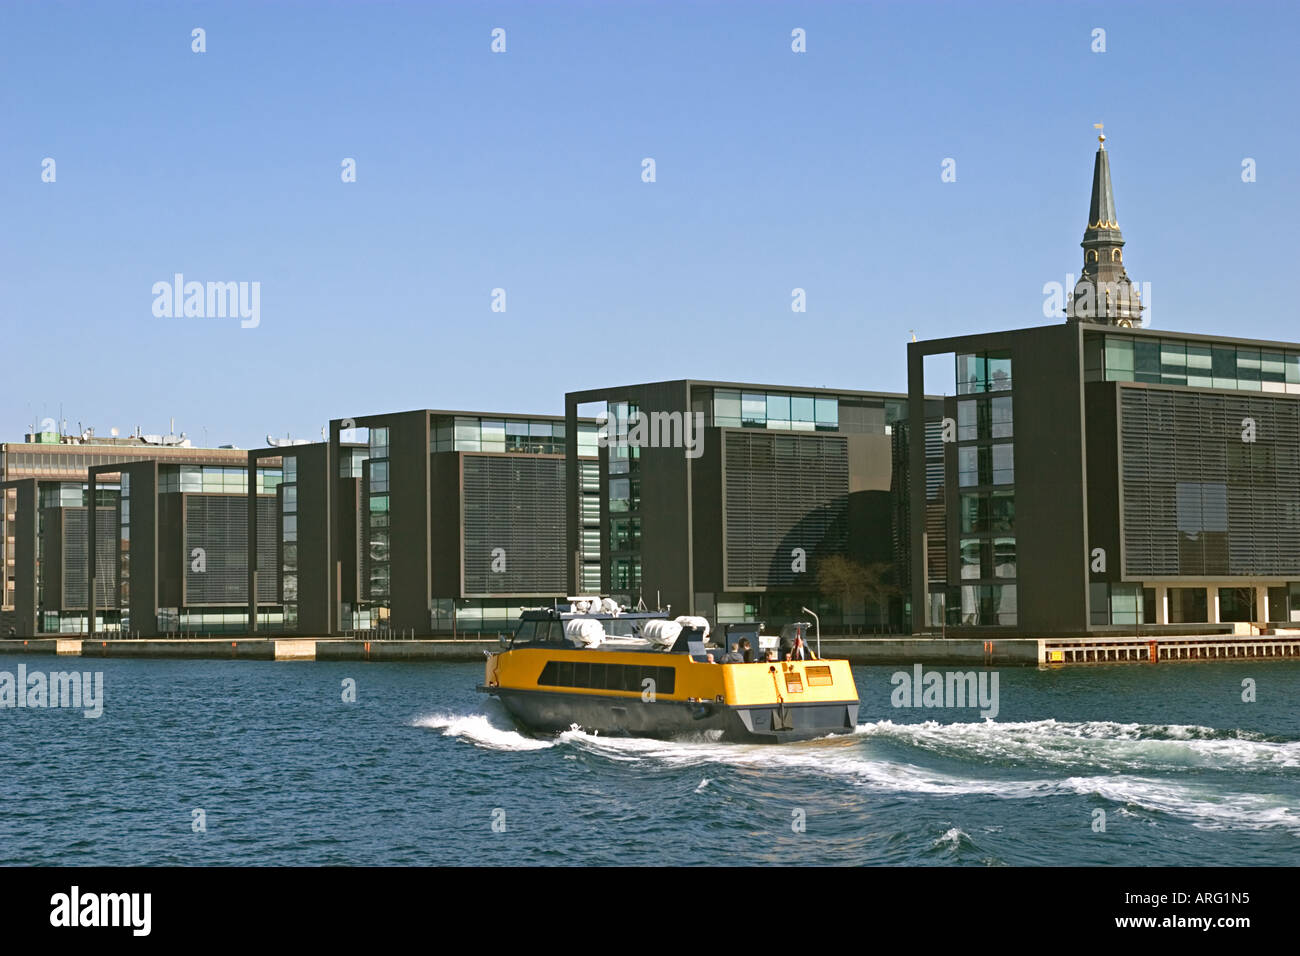 The canal at Christianshavn with a public water bus Stock Photo